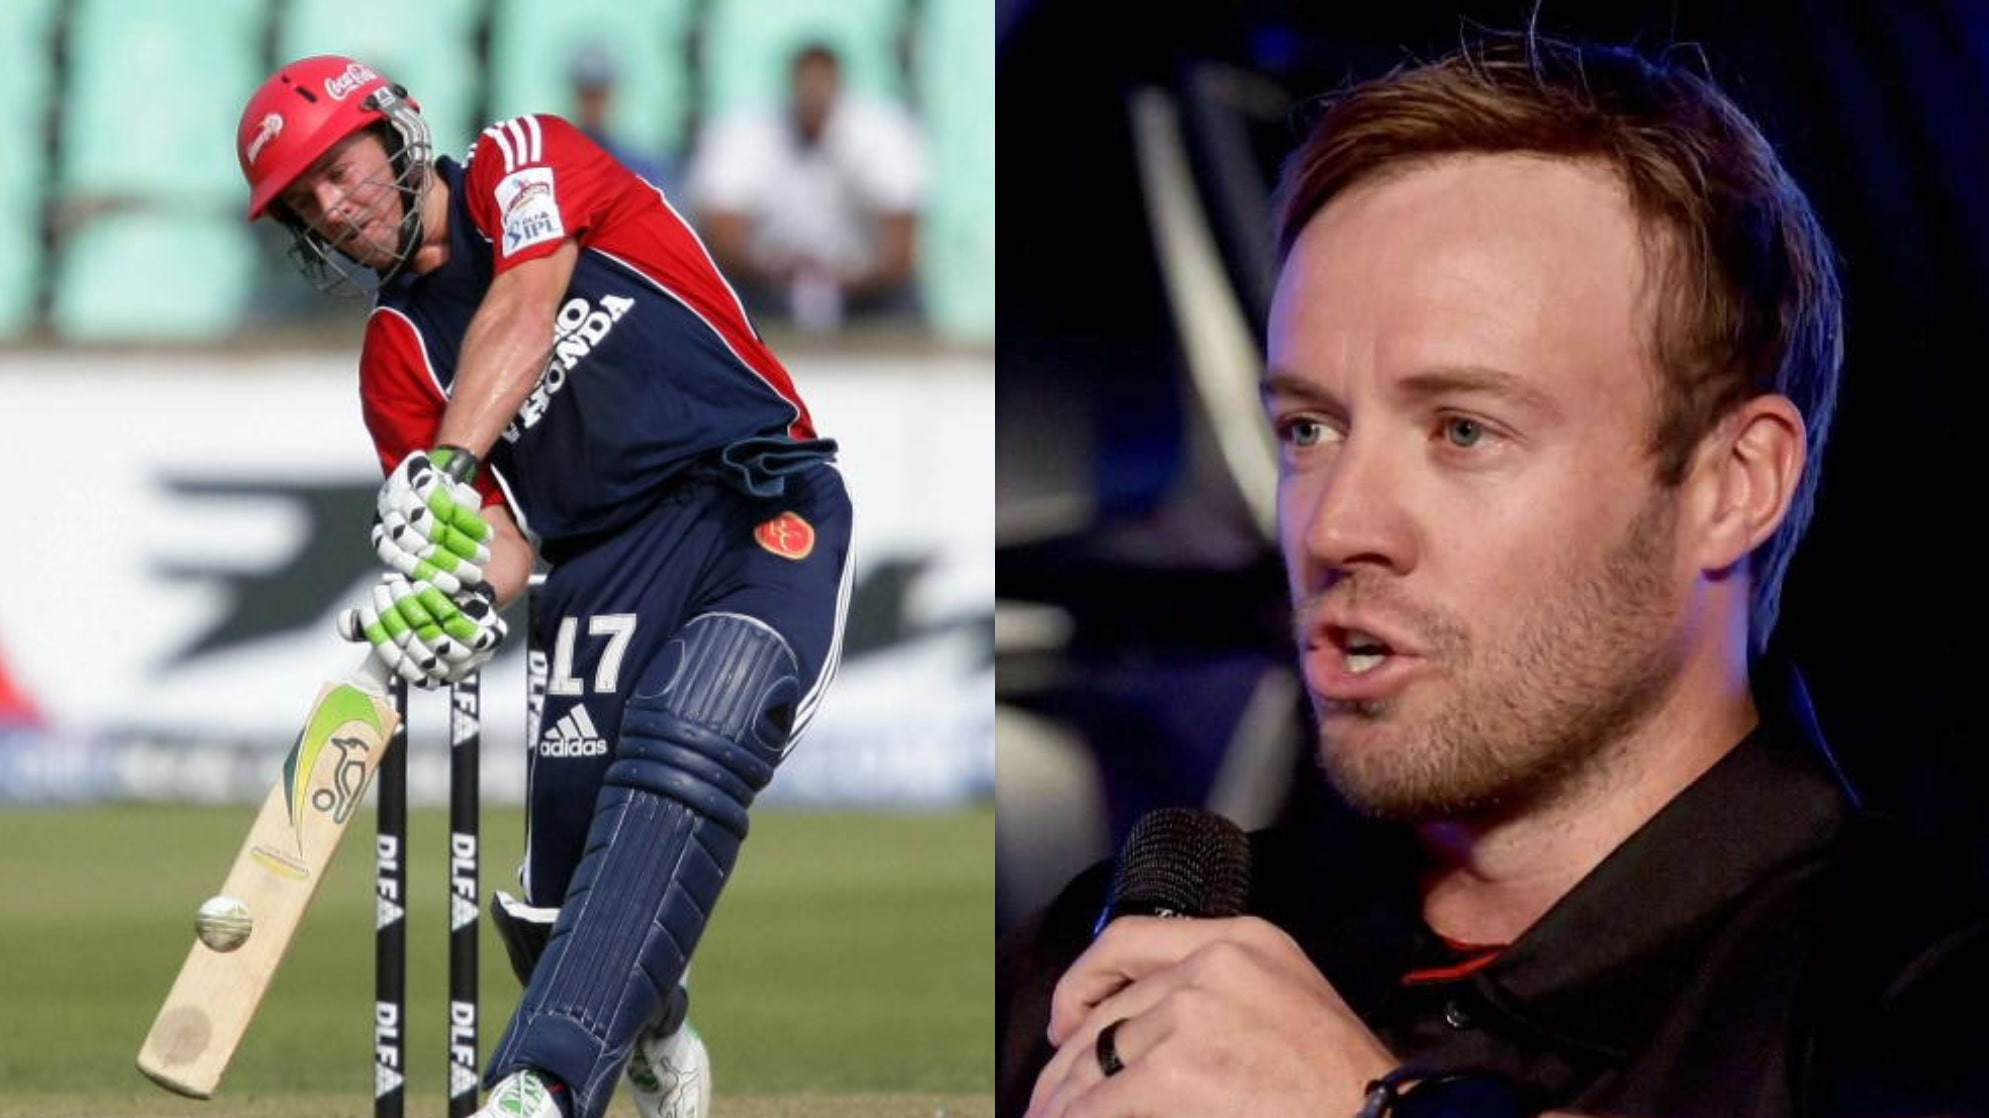 “It's not a nice feeling”- AB de Villiers on Delhi not retaining him after IPL 2010 despite promising him to do so